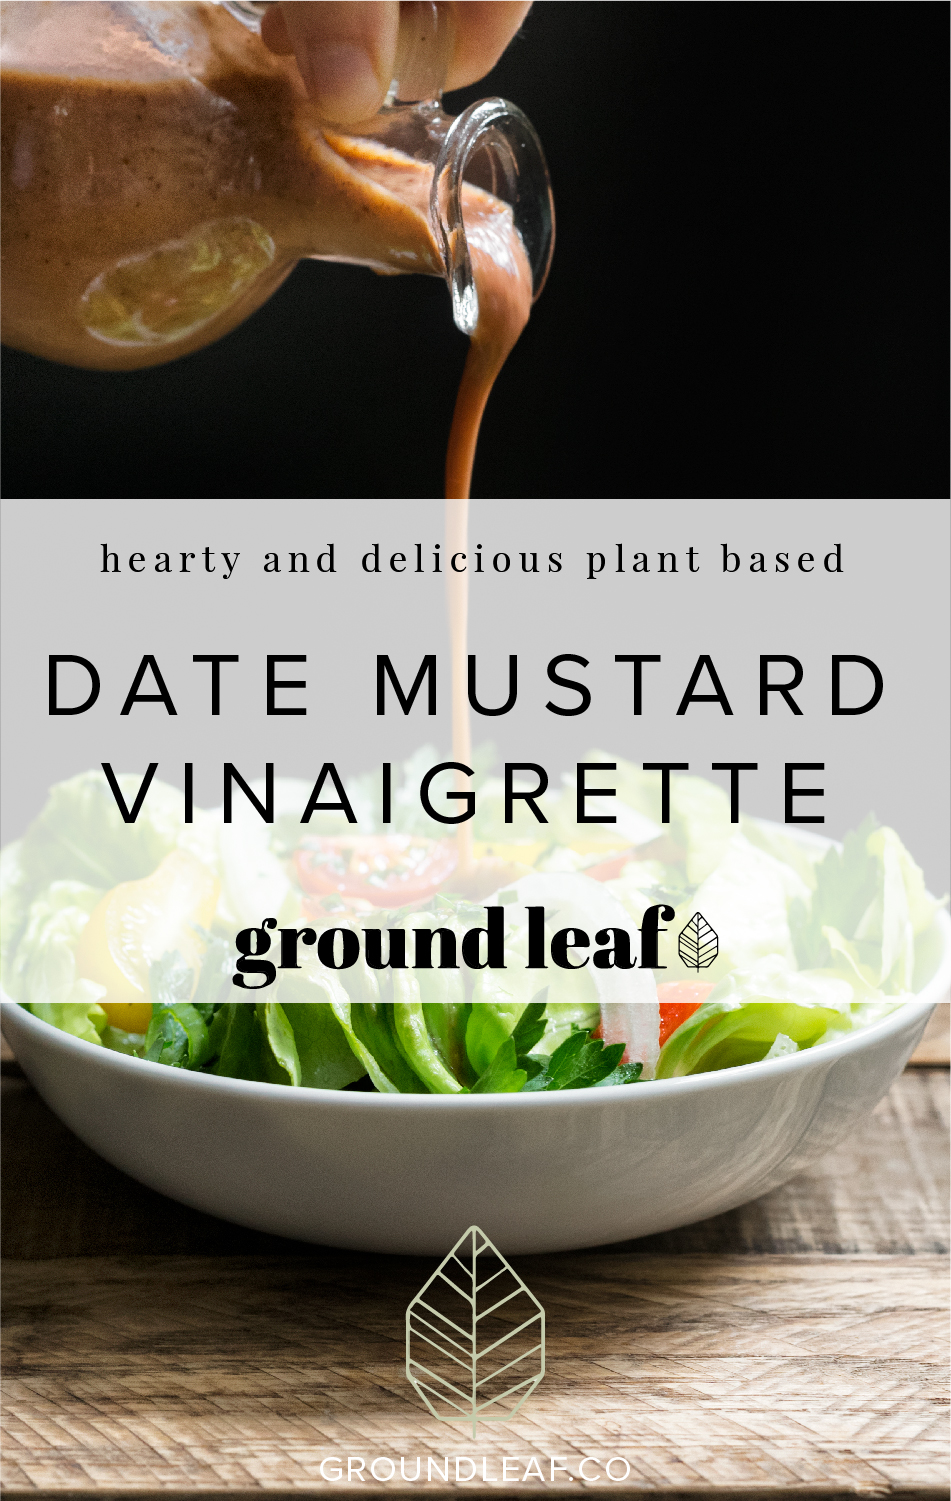 Learn how to make a delicious vegan date mustard vinaigrette.